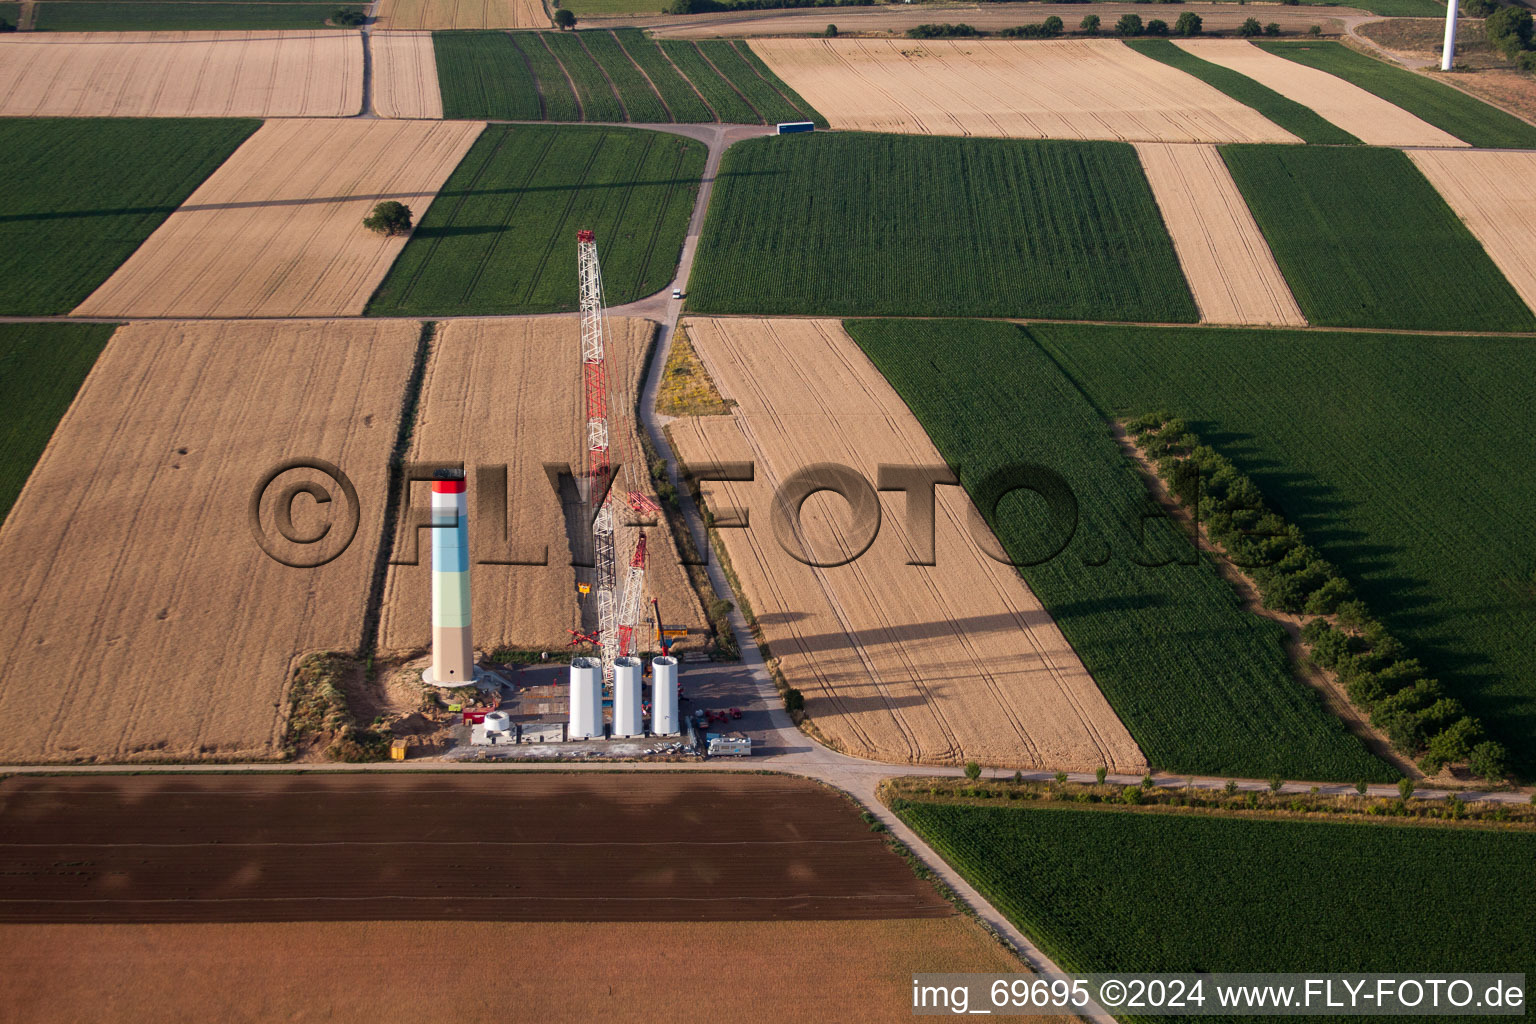 Drone recording of Wind farm construction in Offenbach an der Queich in the state Rhineland-Palatinate, Germany